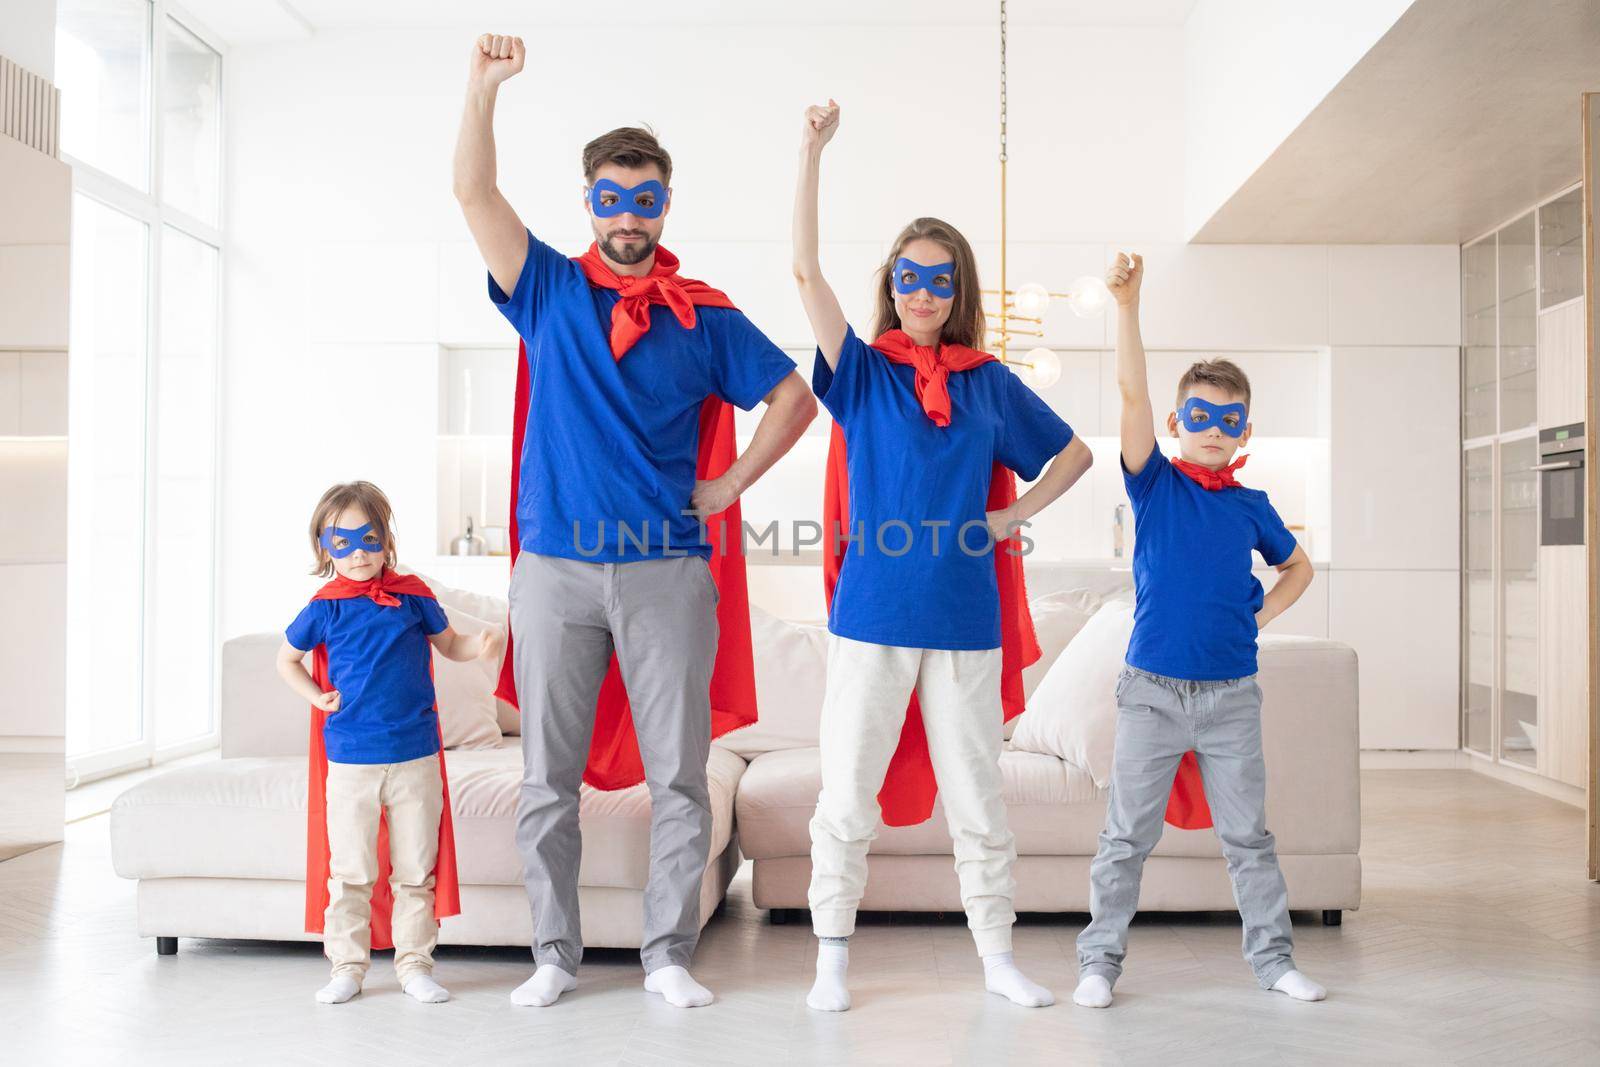 Superhero family at home by ALotOfPeople